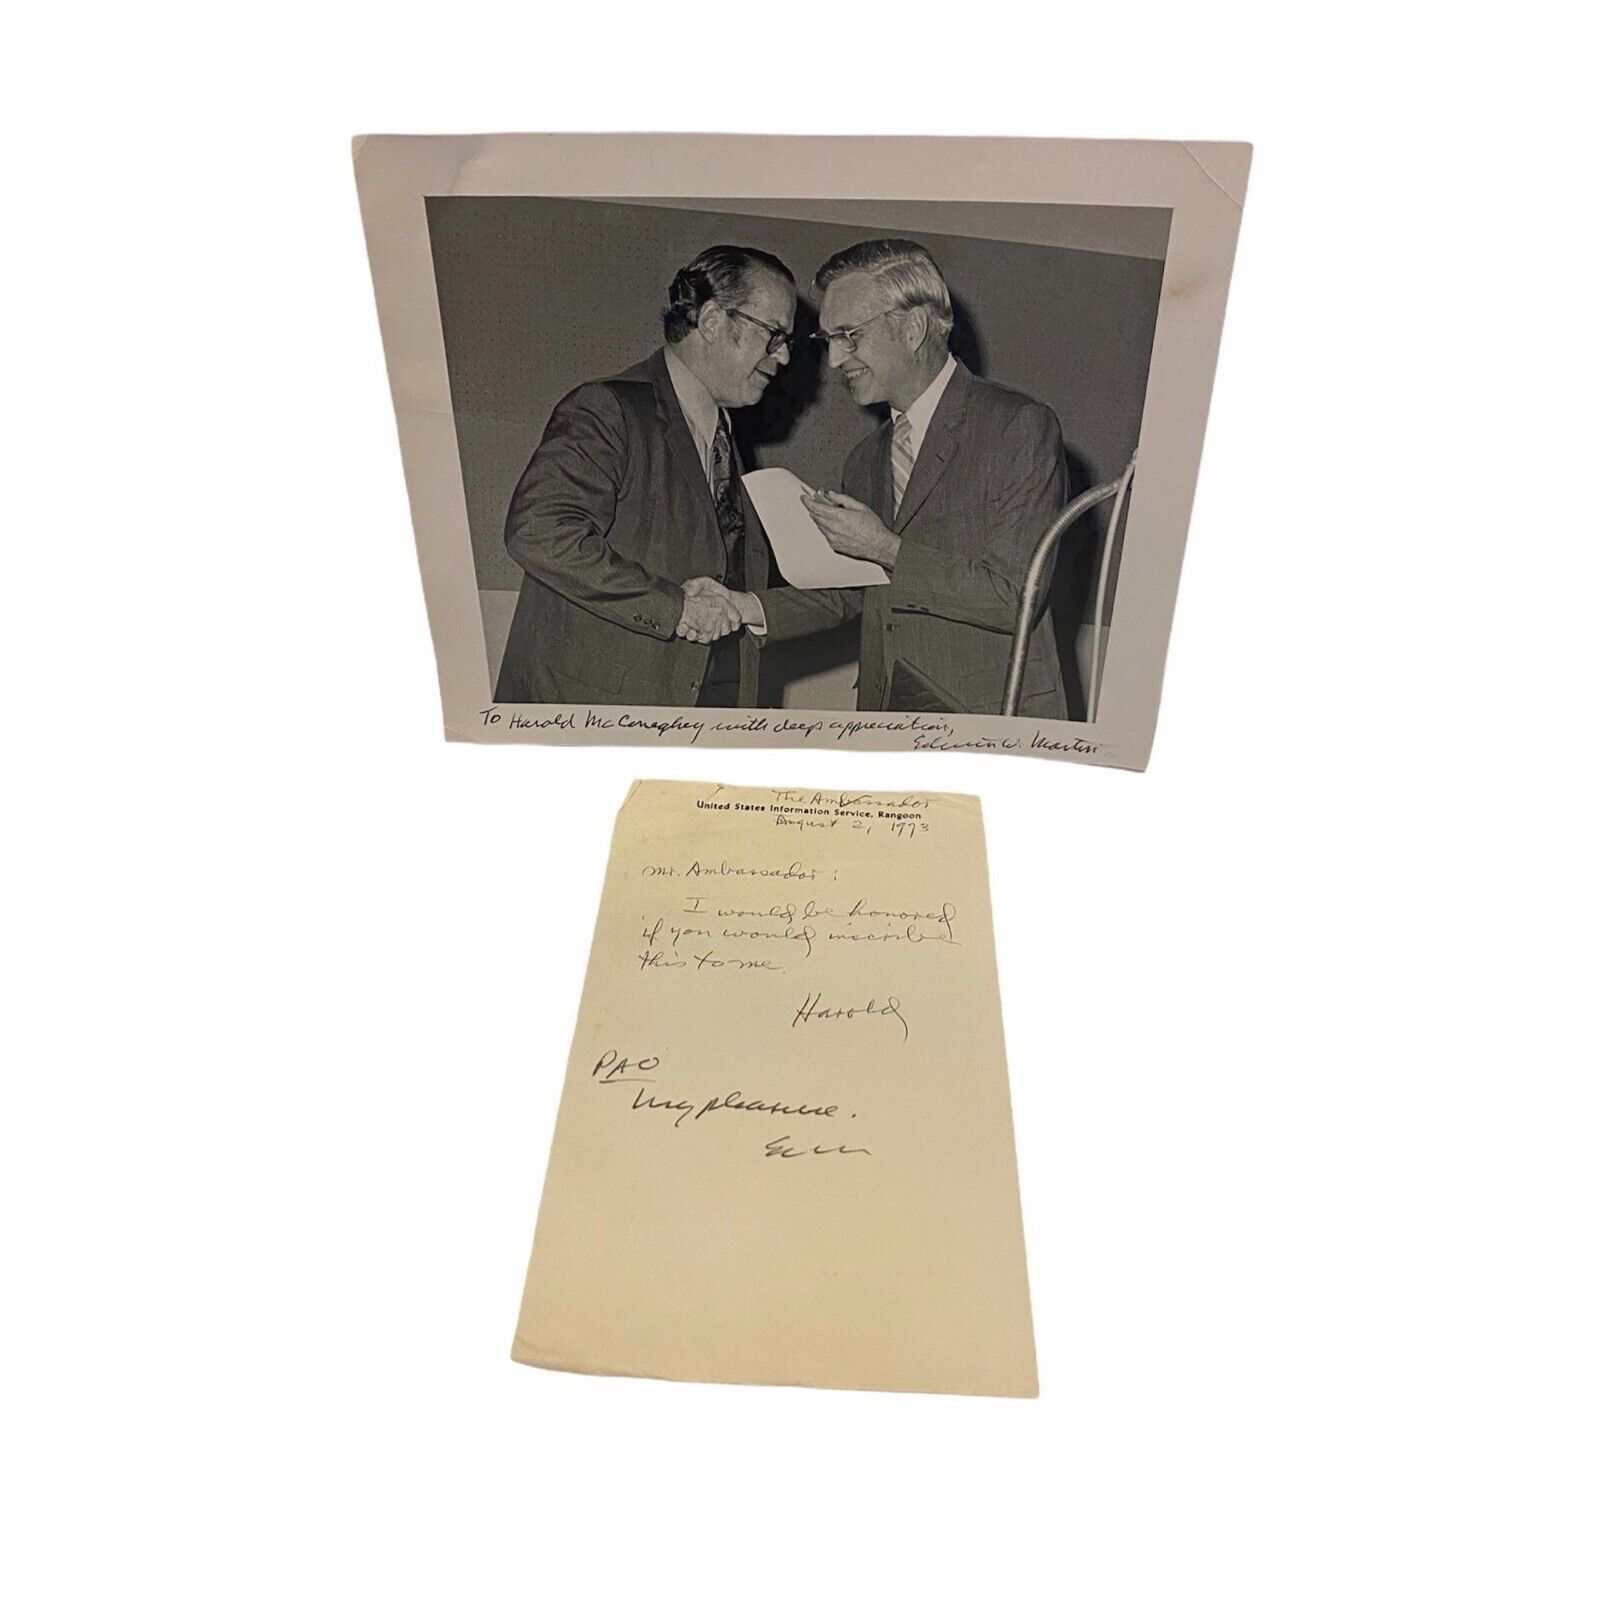 Photo Harold McConeghey Of U.S. Information Service Signed By Edwin W. Martin